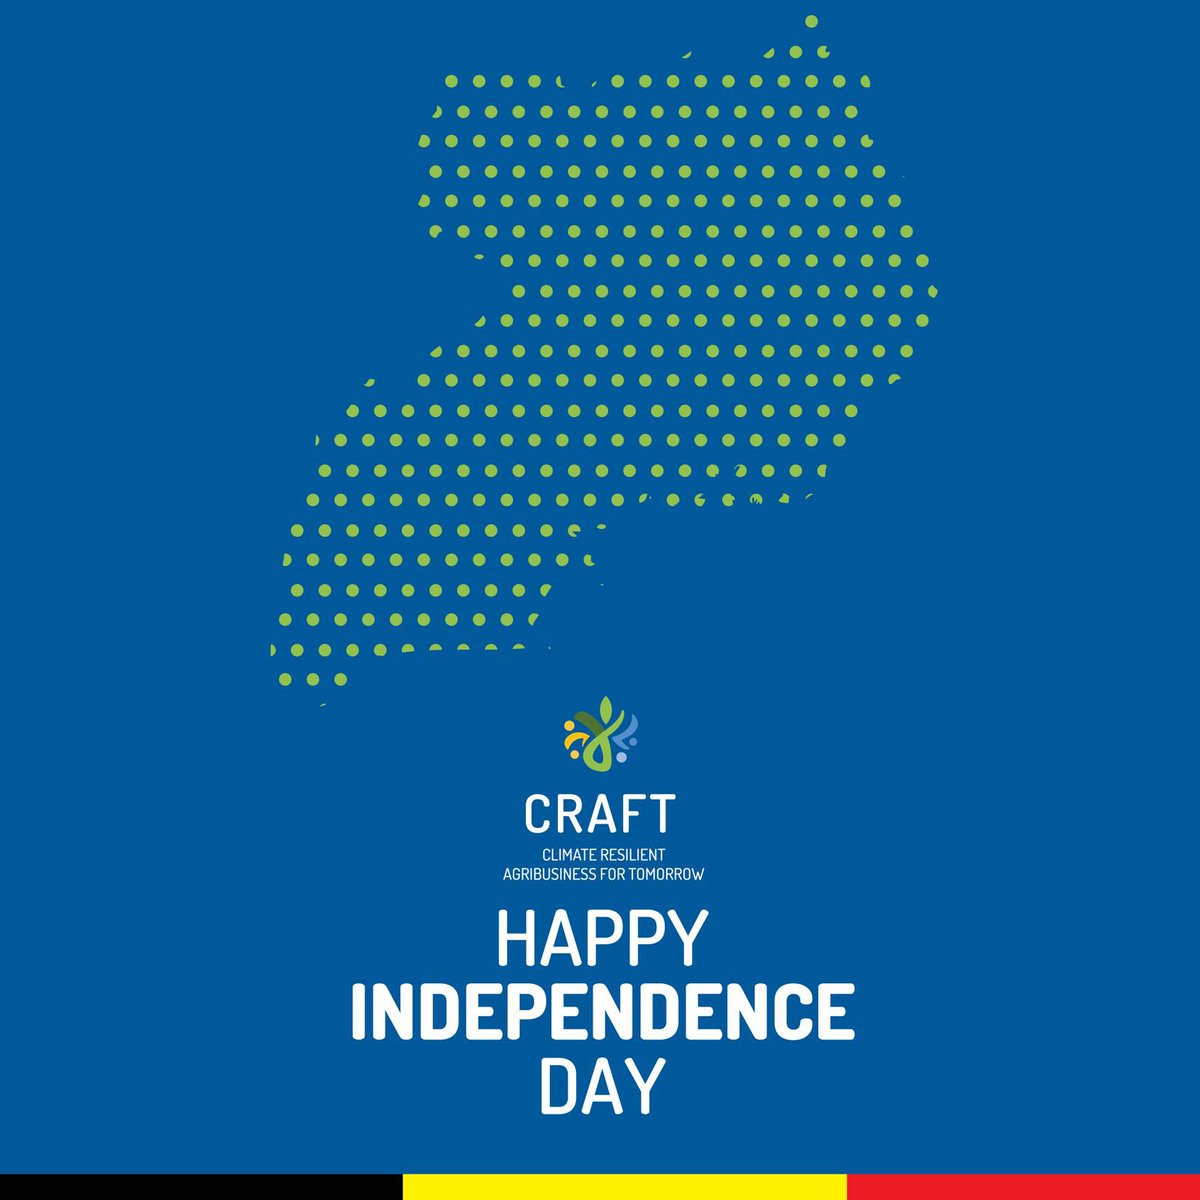 #UgAt61 Happy Independence Day, Uganda! Discover how CRAFT is working hand in hand with Ugandan agriSMEs, Cooperatives, and smallholder farmers to build climate resilient food systems. 🌍 Explore more at crafteastafrica.org #UgandaAt61 #FoodSecurity @SNV_Uganda